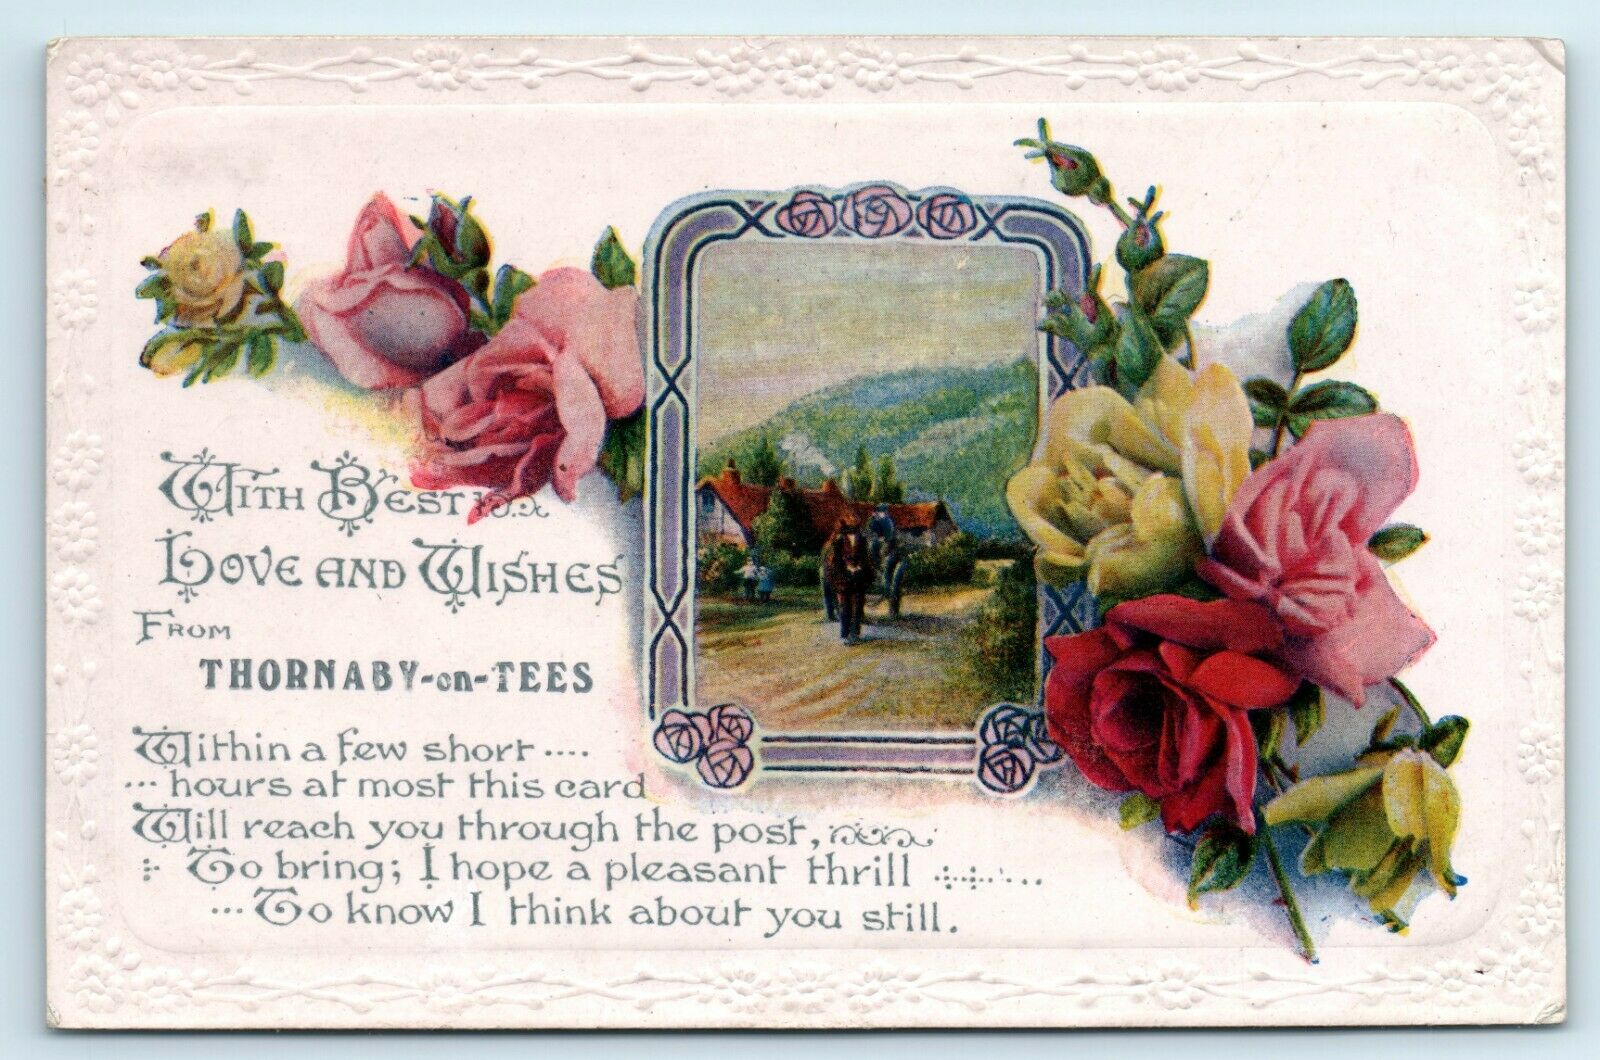 House Clearance - 3 POSTCARD THORNABY-ON-TEES GREETINGS TYPE 1921-22